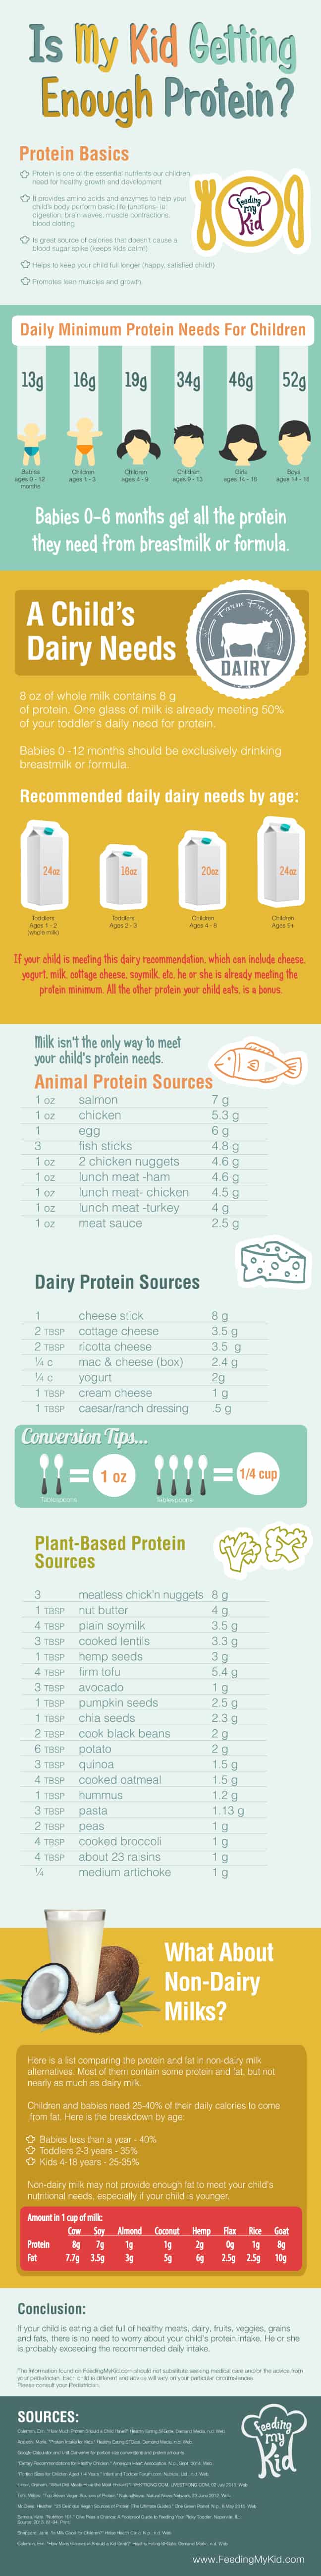 Is My Kid Getting Enough Protein INFOGRAPHIC